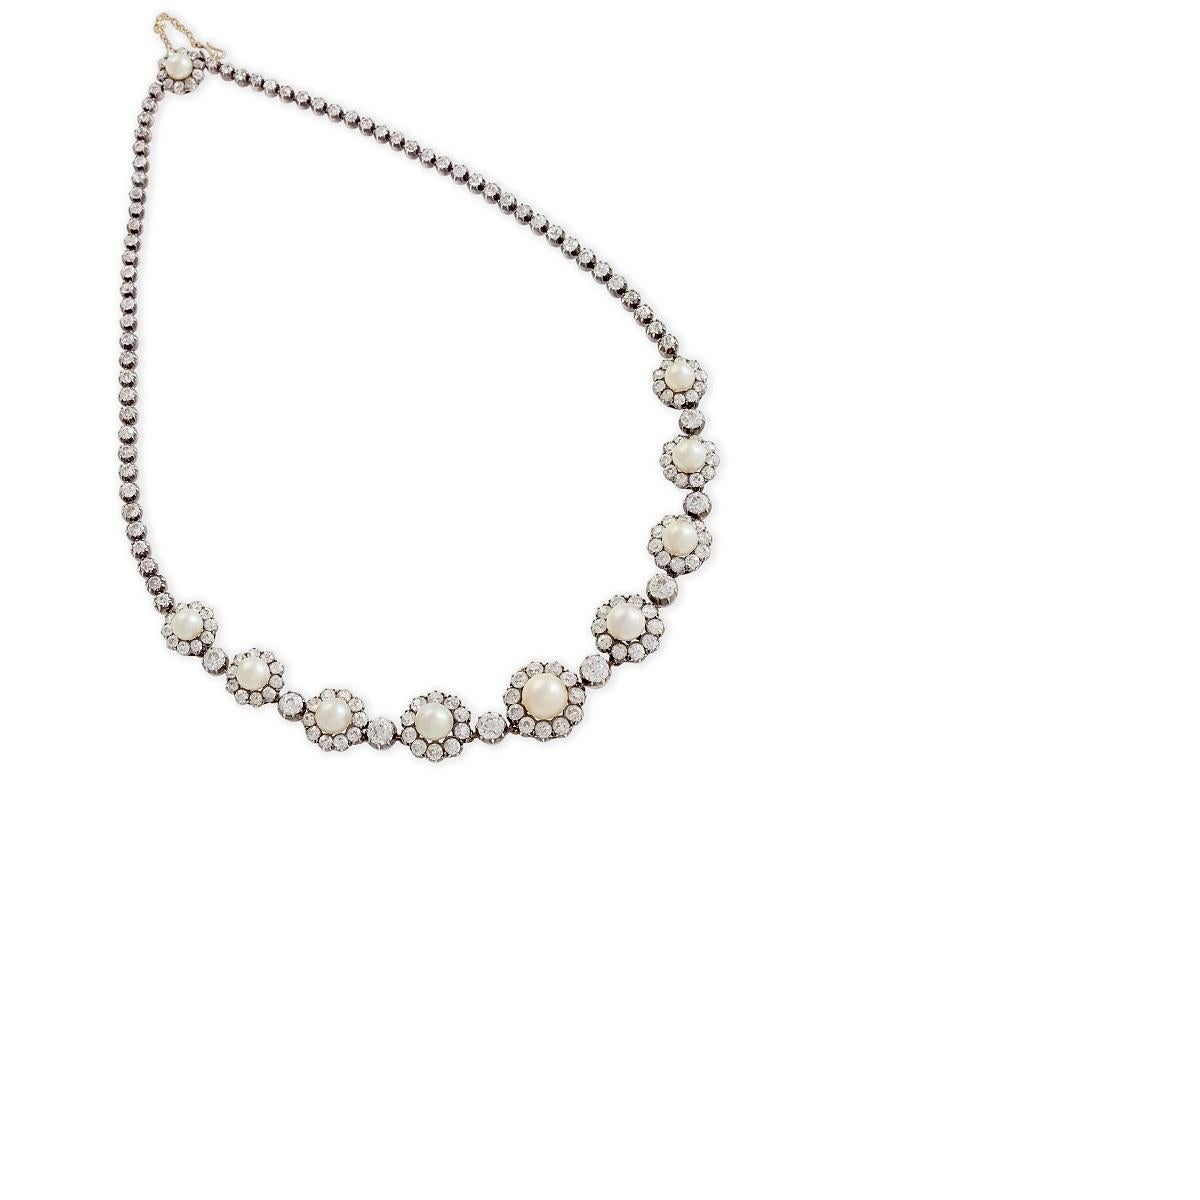 This classic necklace from the Victorian Era is composed of ten graduating natural saltwater button pearls and twenty carats of diamonds. Each natural saltwater pearl is framed by old European-cut diamonds joined by single-stone diamond links, and